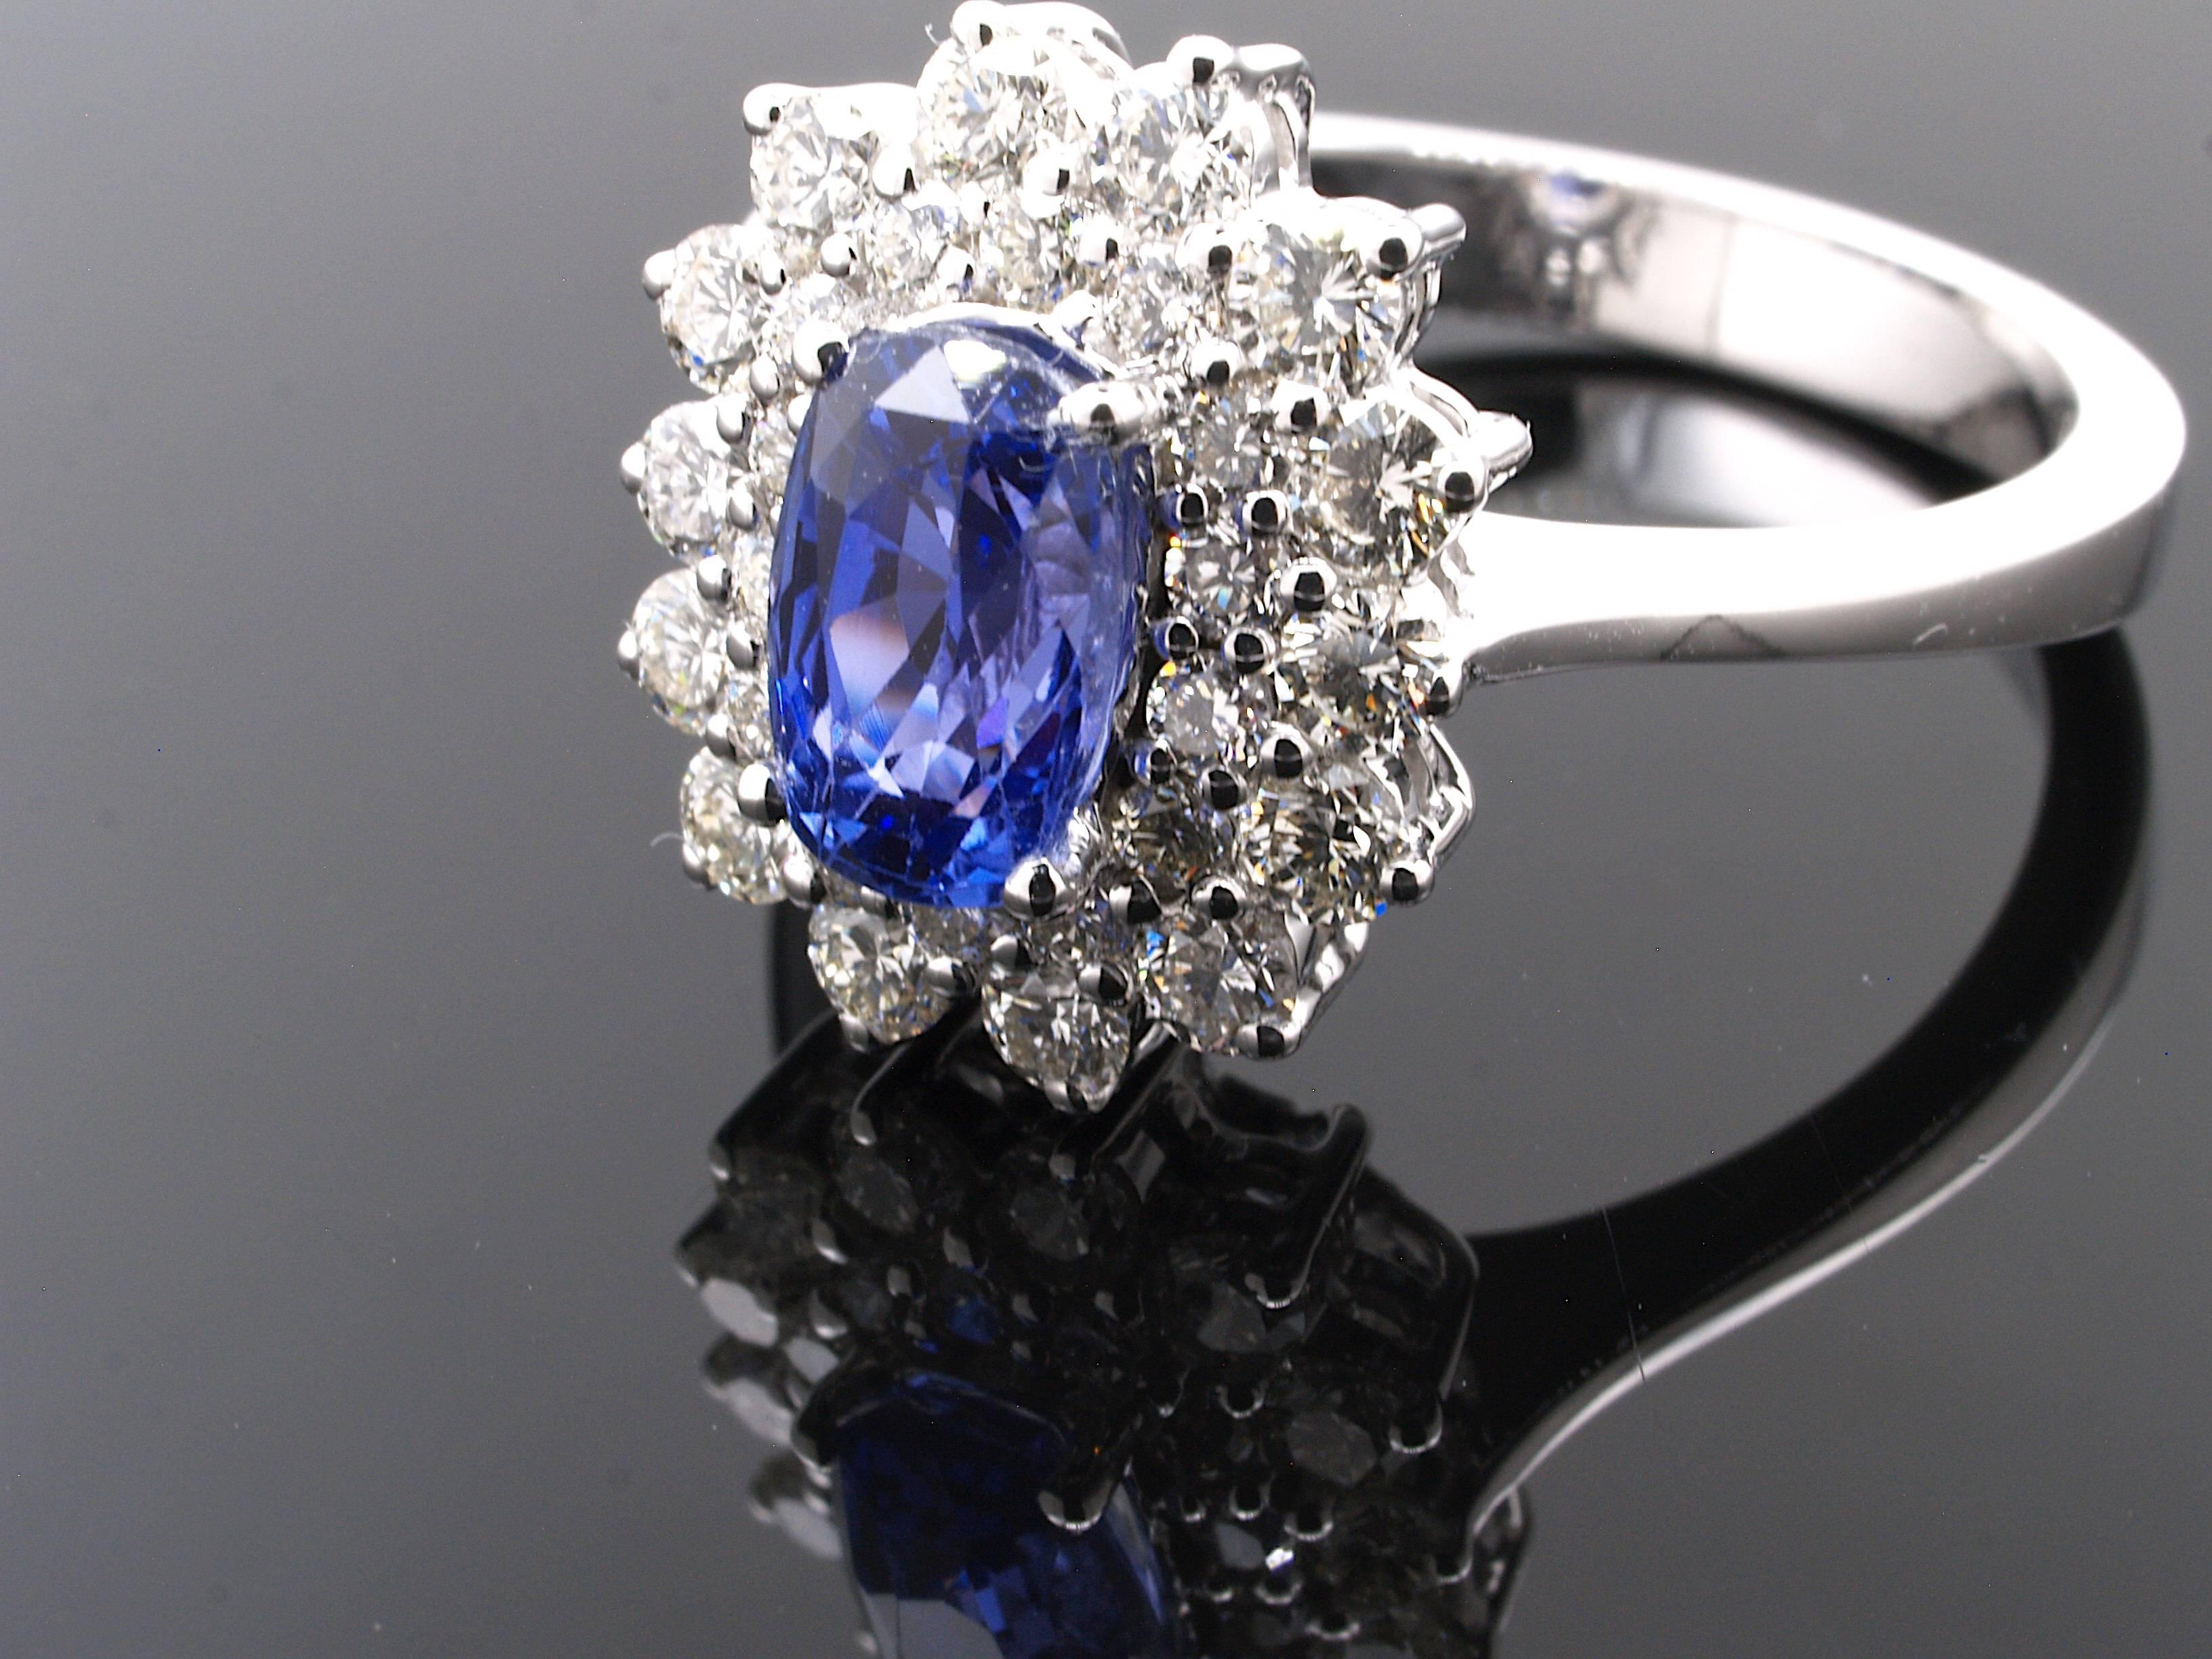              +++++++All realistic offers are welcome.+++++++


This classic ring has a very nice blue Sapphire at its center, surrounded by a sparkling diamond halo. With no indication of thermal enhancement and a IGI certificate to support it, this